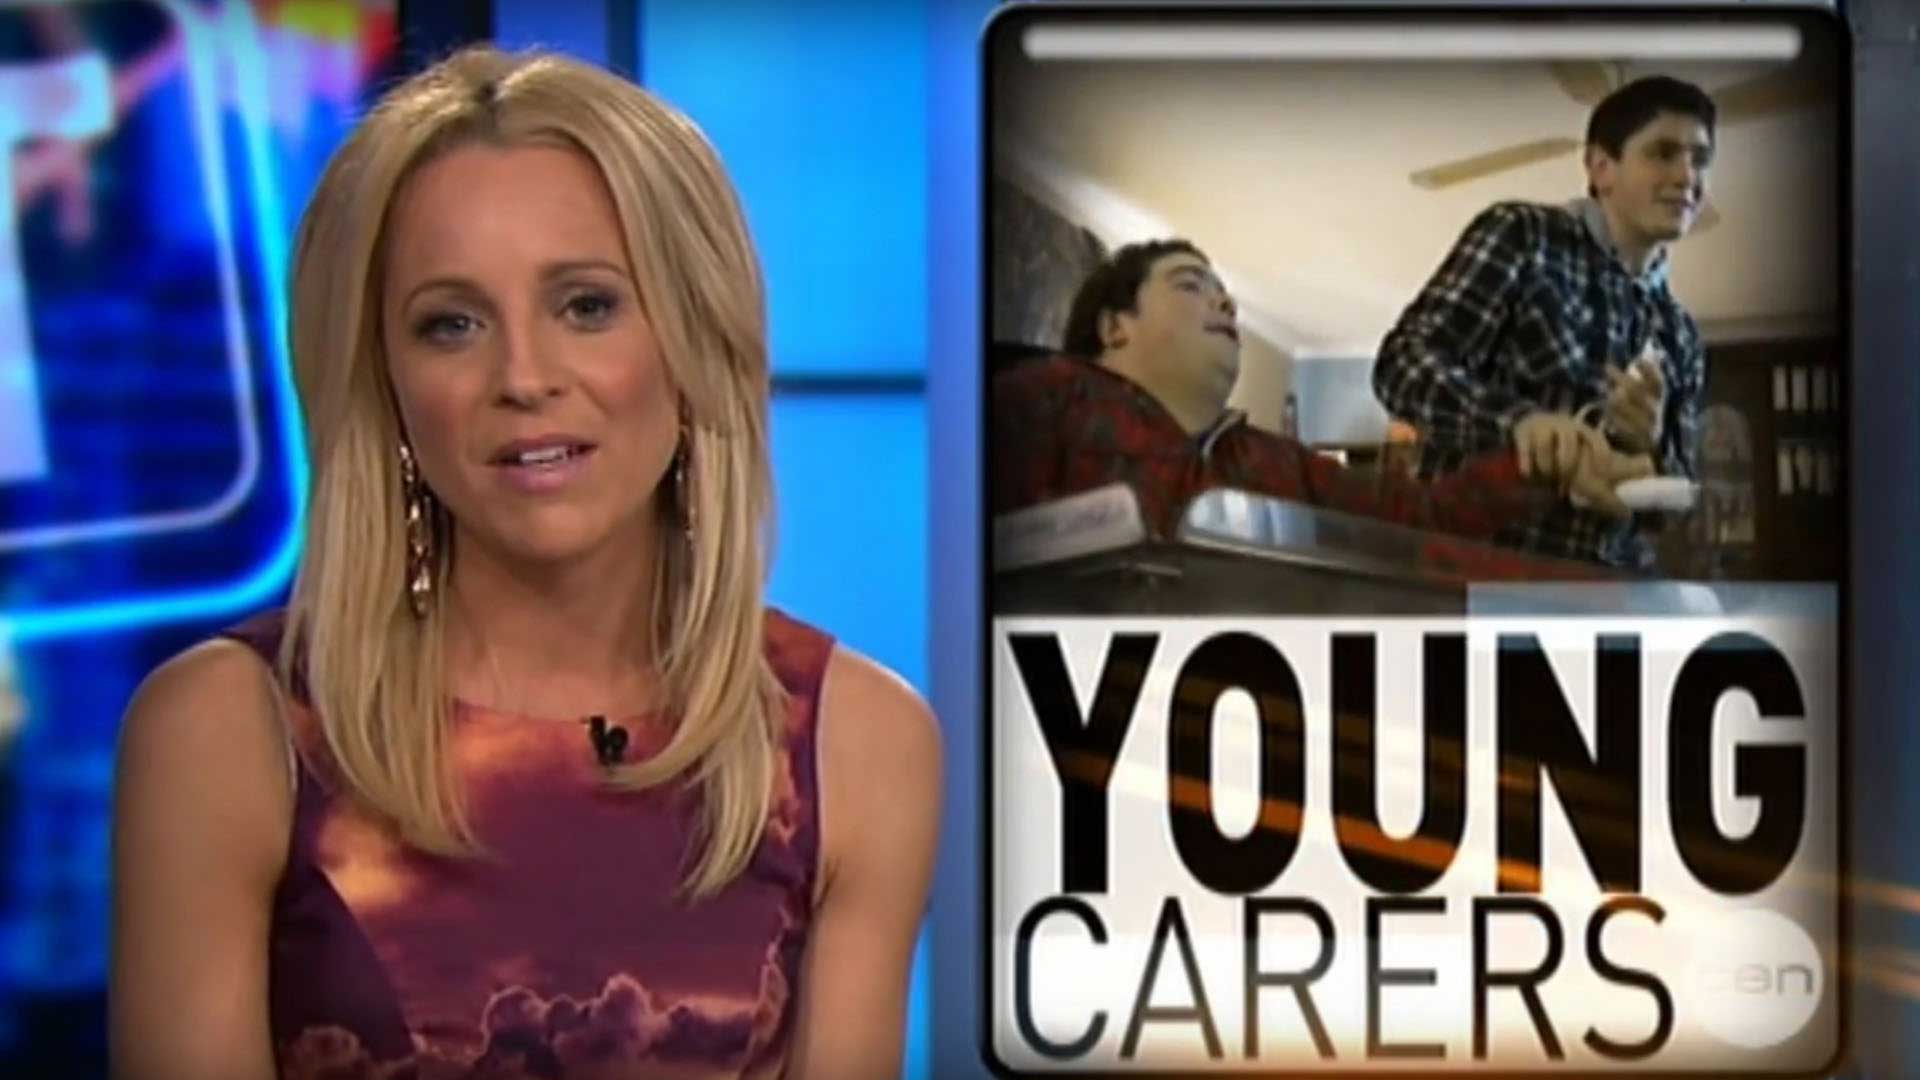 Still of Carrie Bickmore introducing Young Carers segment